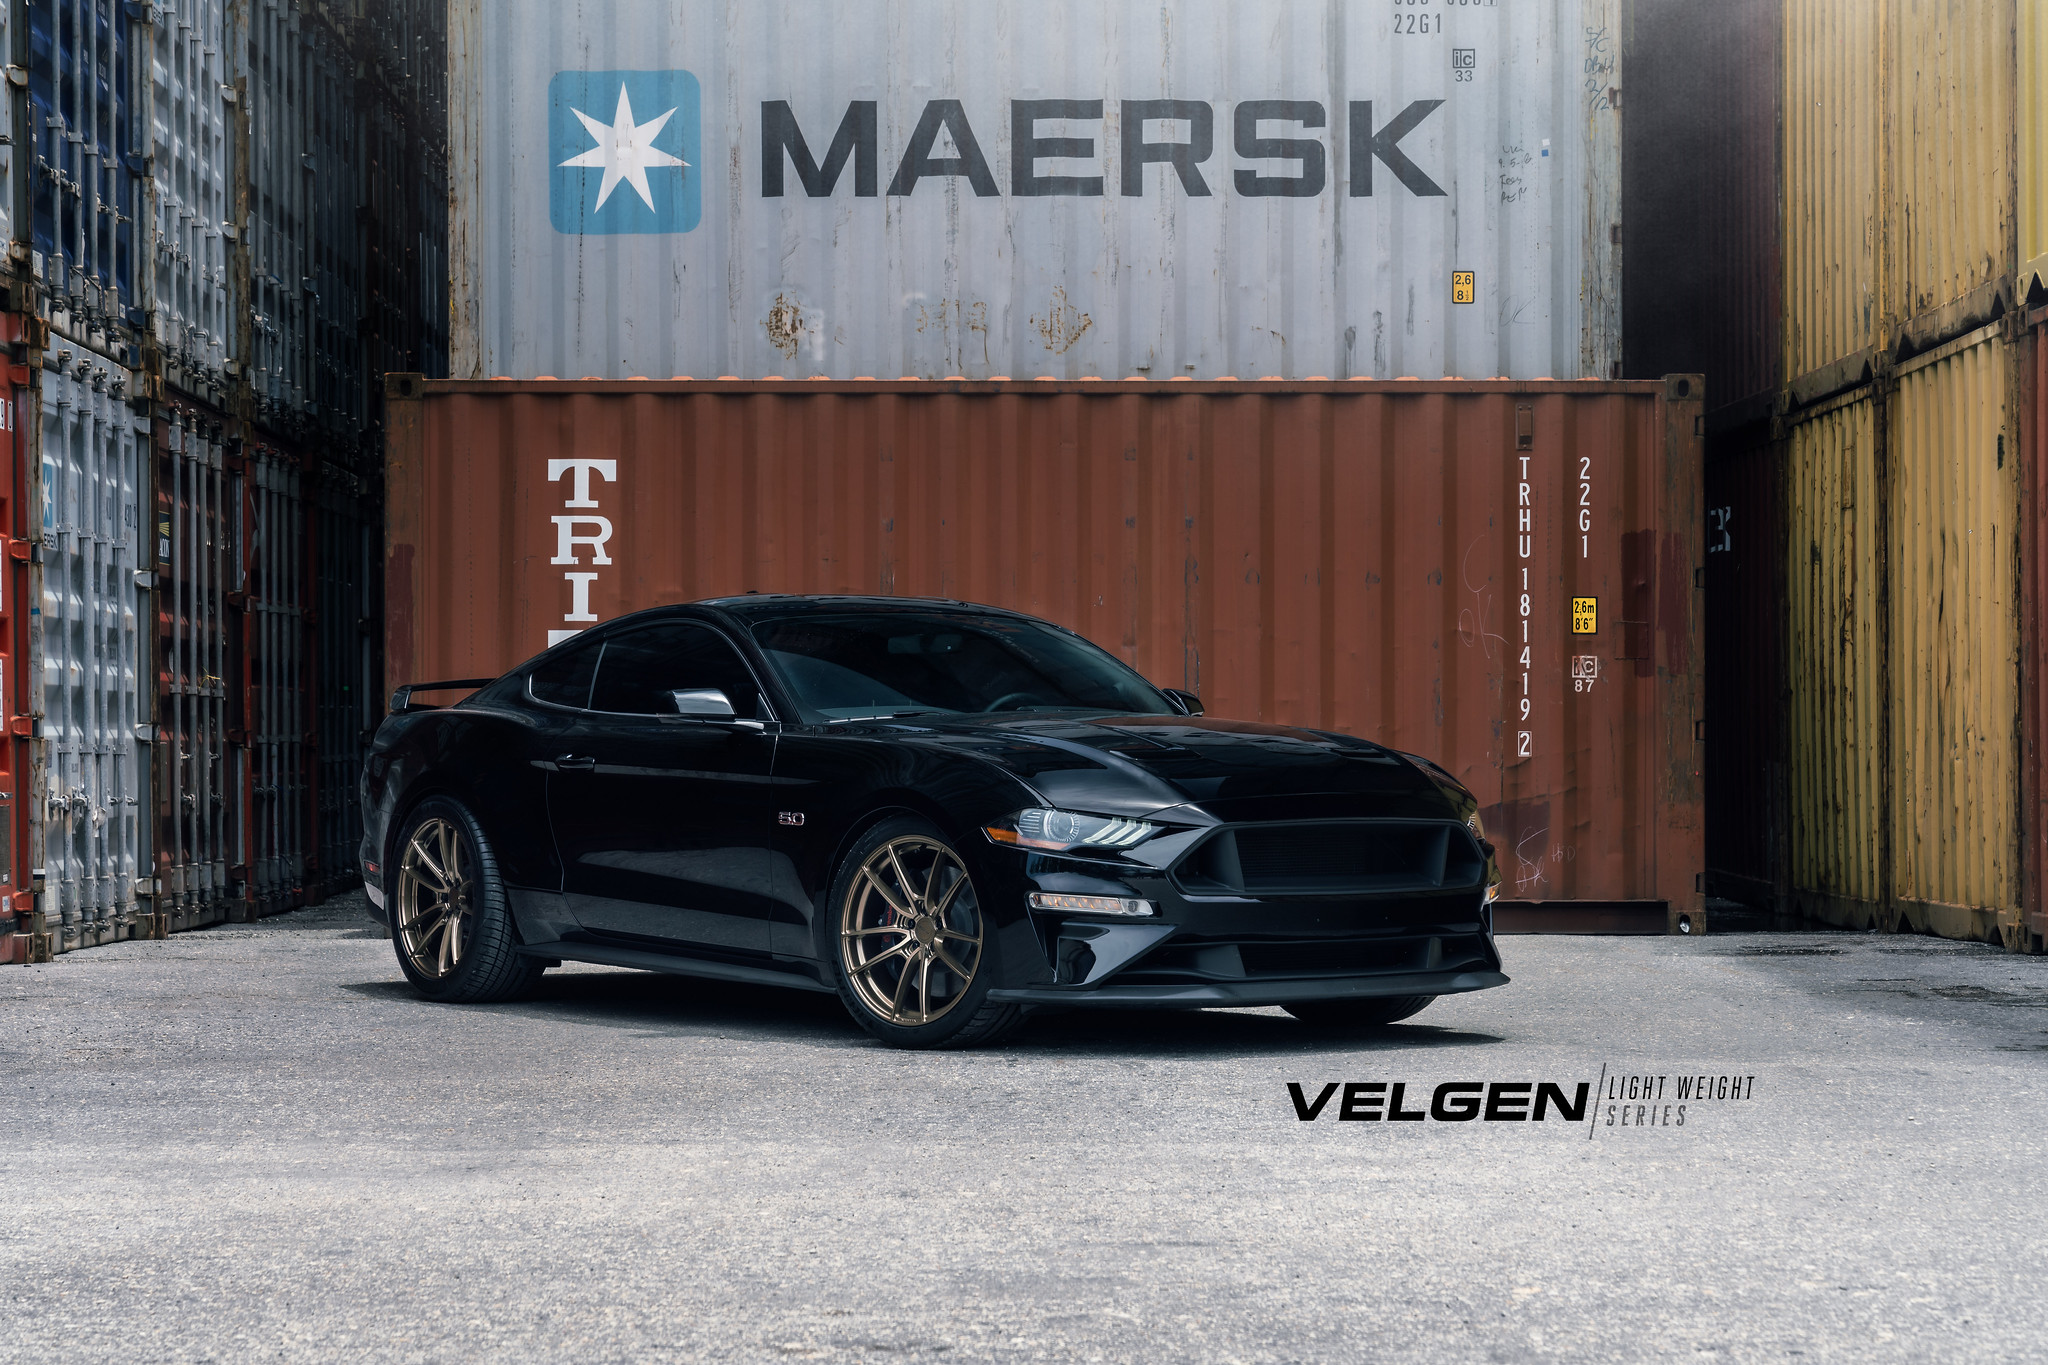 S650 Mustang 19" 20" Velgen Flow Forged Concave Wheels Mustang S650 - Vibe Motorsports Official Thread 51386091805_6d011a1a3c_k